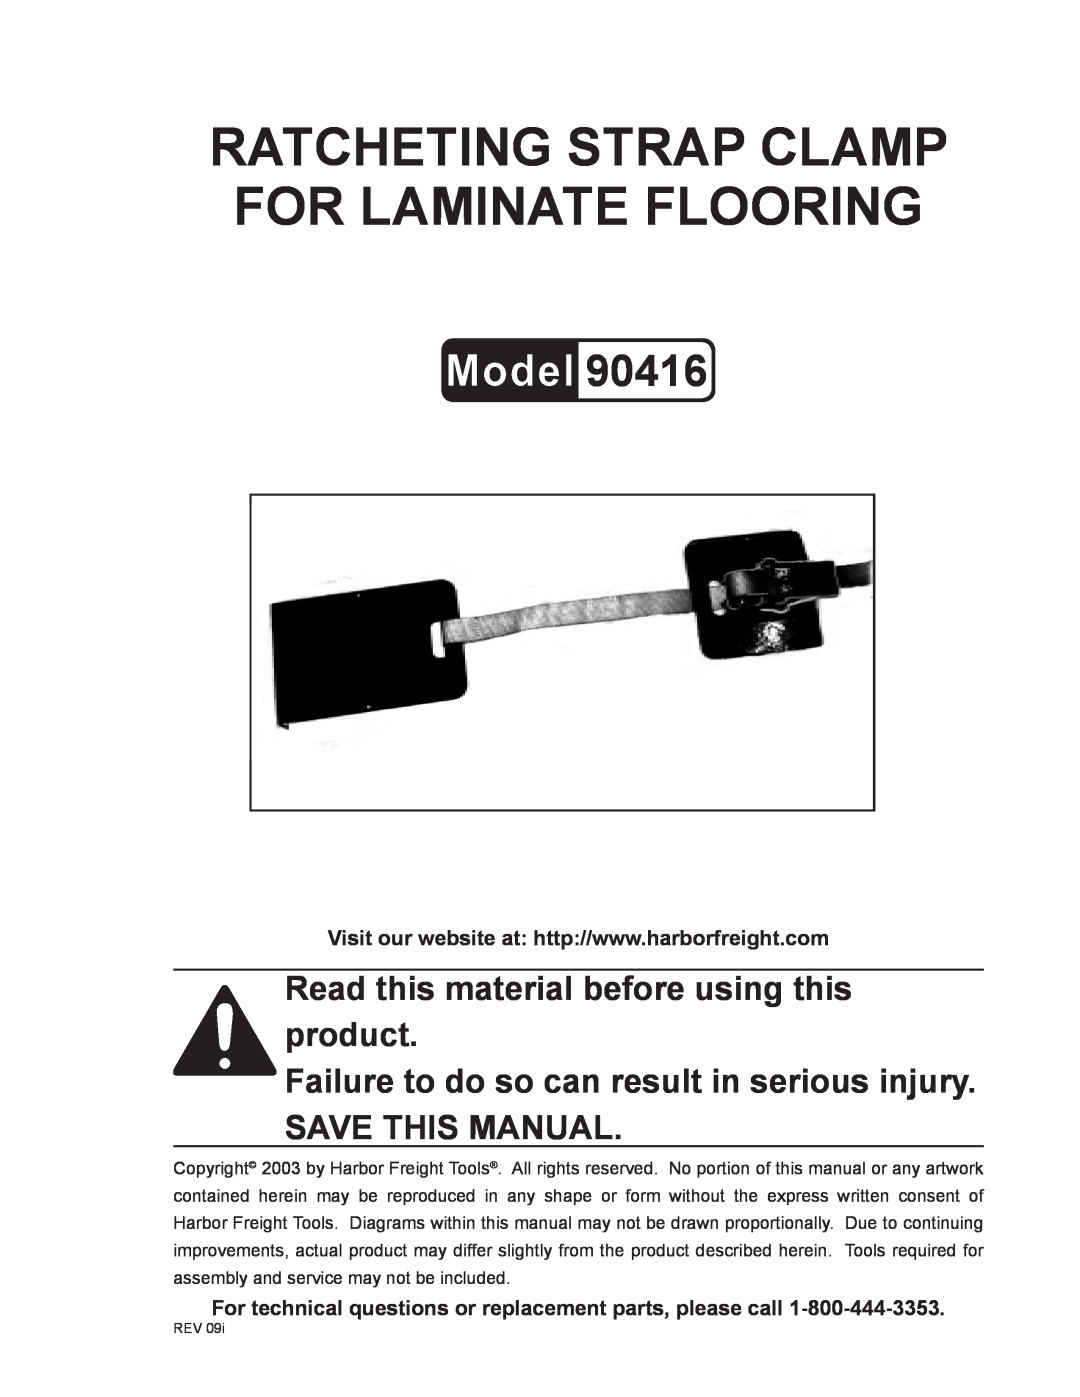 Harbor Freight Tools 90416 manual Ratcheting Strap Clamp For Laminate Flooring, Assembly & Operation Instructions 